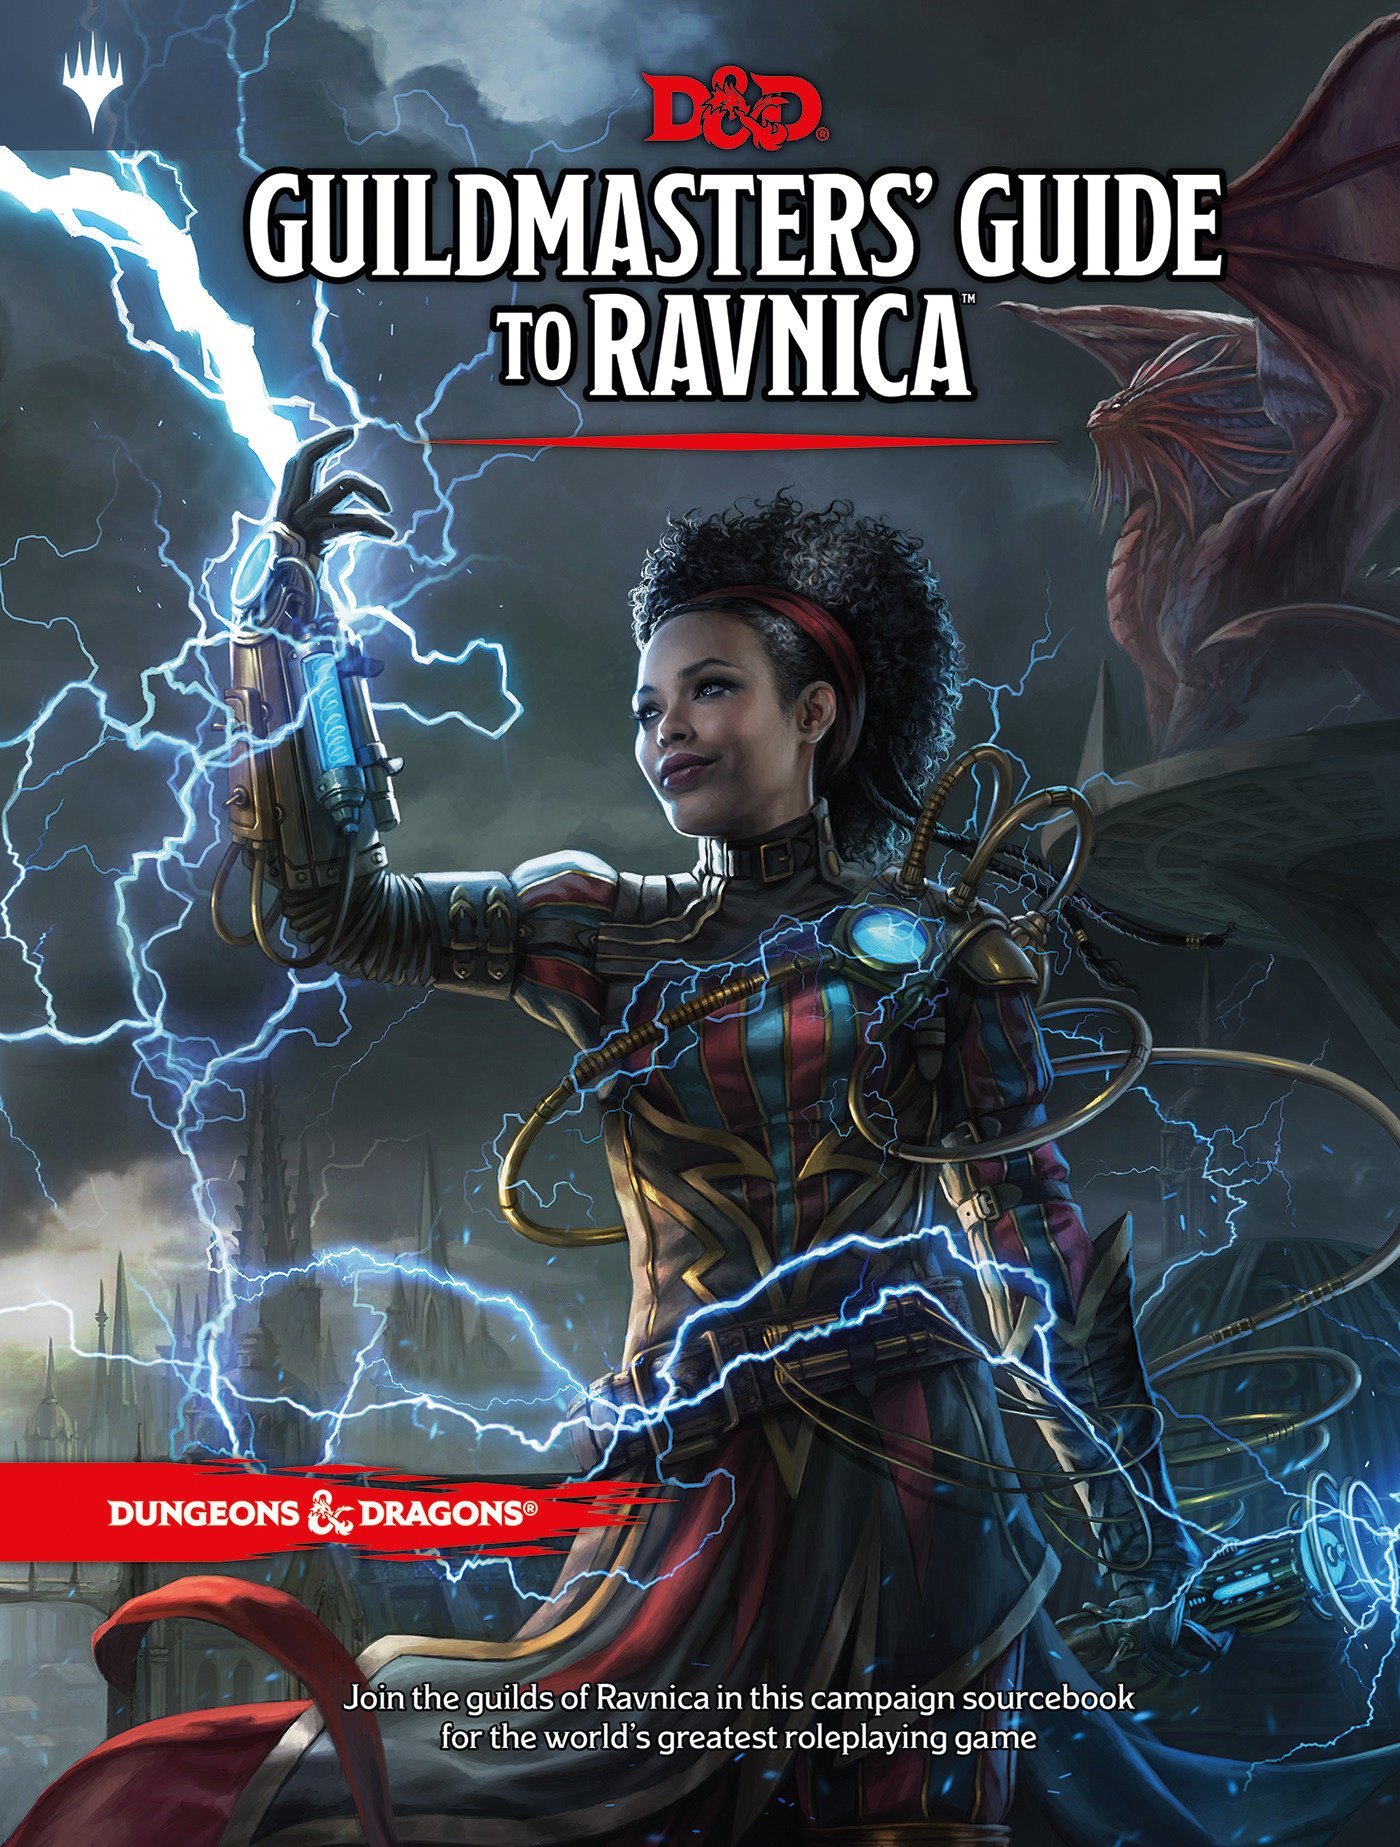 download guildmasters guide to ravnica dice